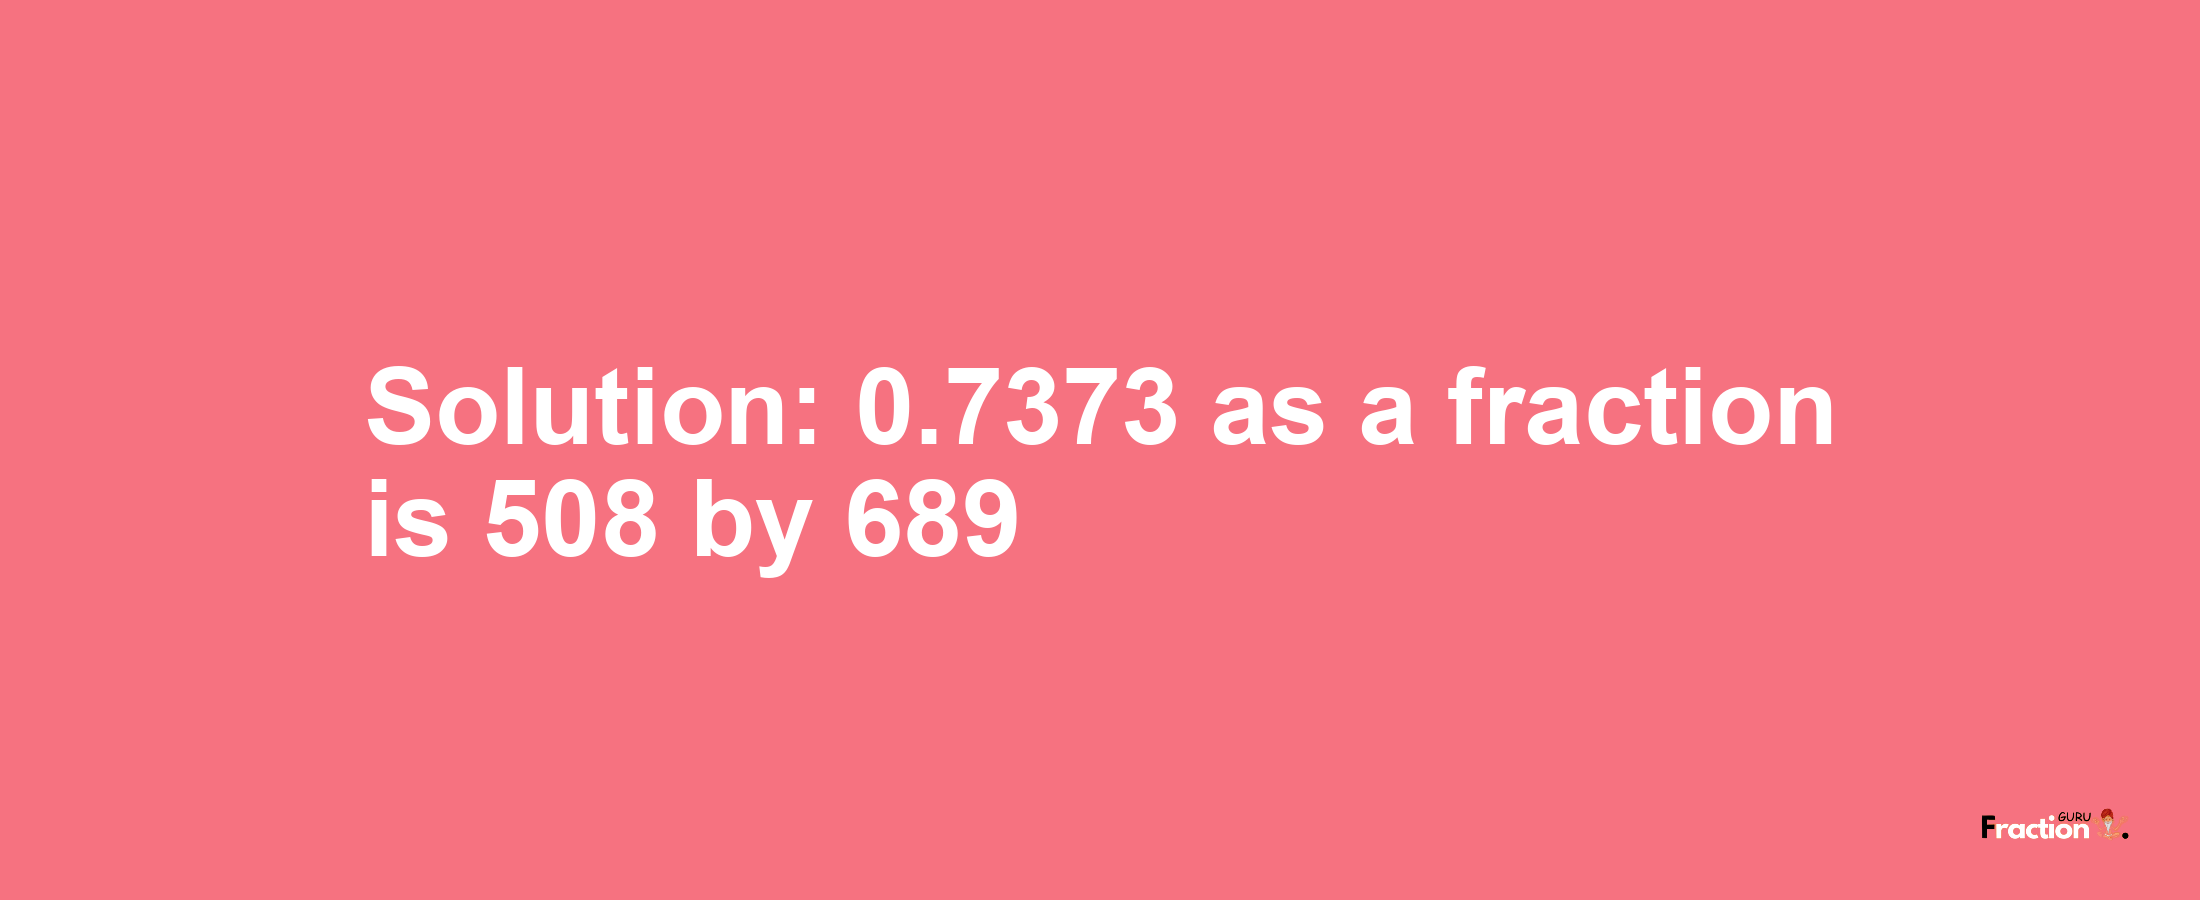 Solution:0.7373 as a fraction is 508/689